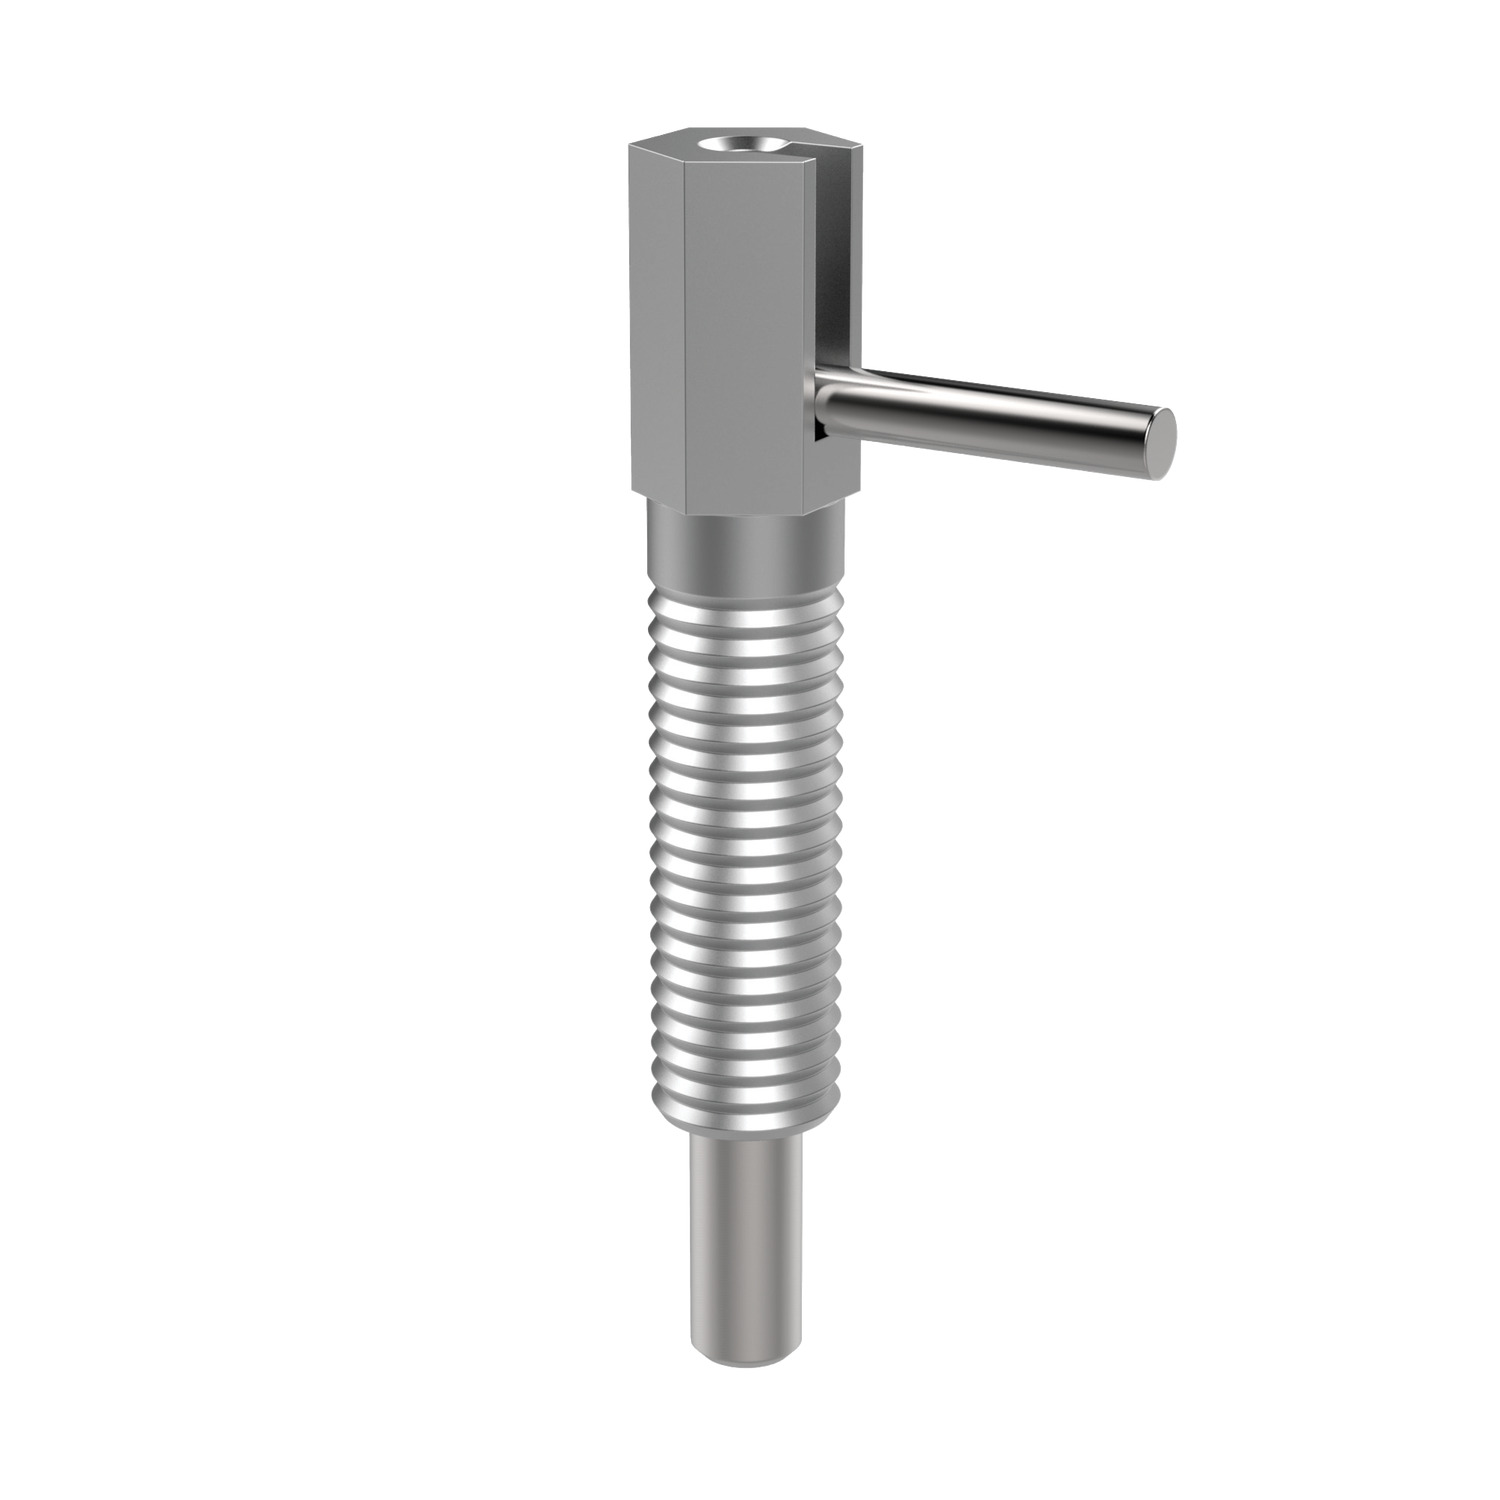 Index Plungers - Lever Grip Lever grip index plungers with coarse thread, locking. Pull back and turn lever 180º to retract pin. To enable pin to be held in retracted position, secure lever in notched catch on plunger body.